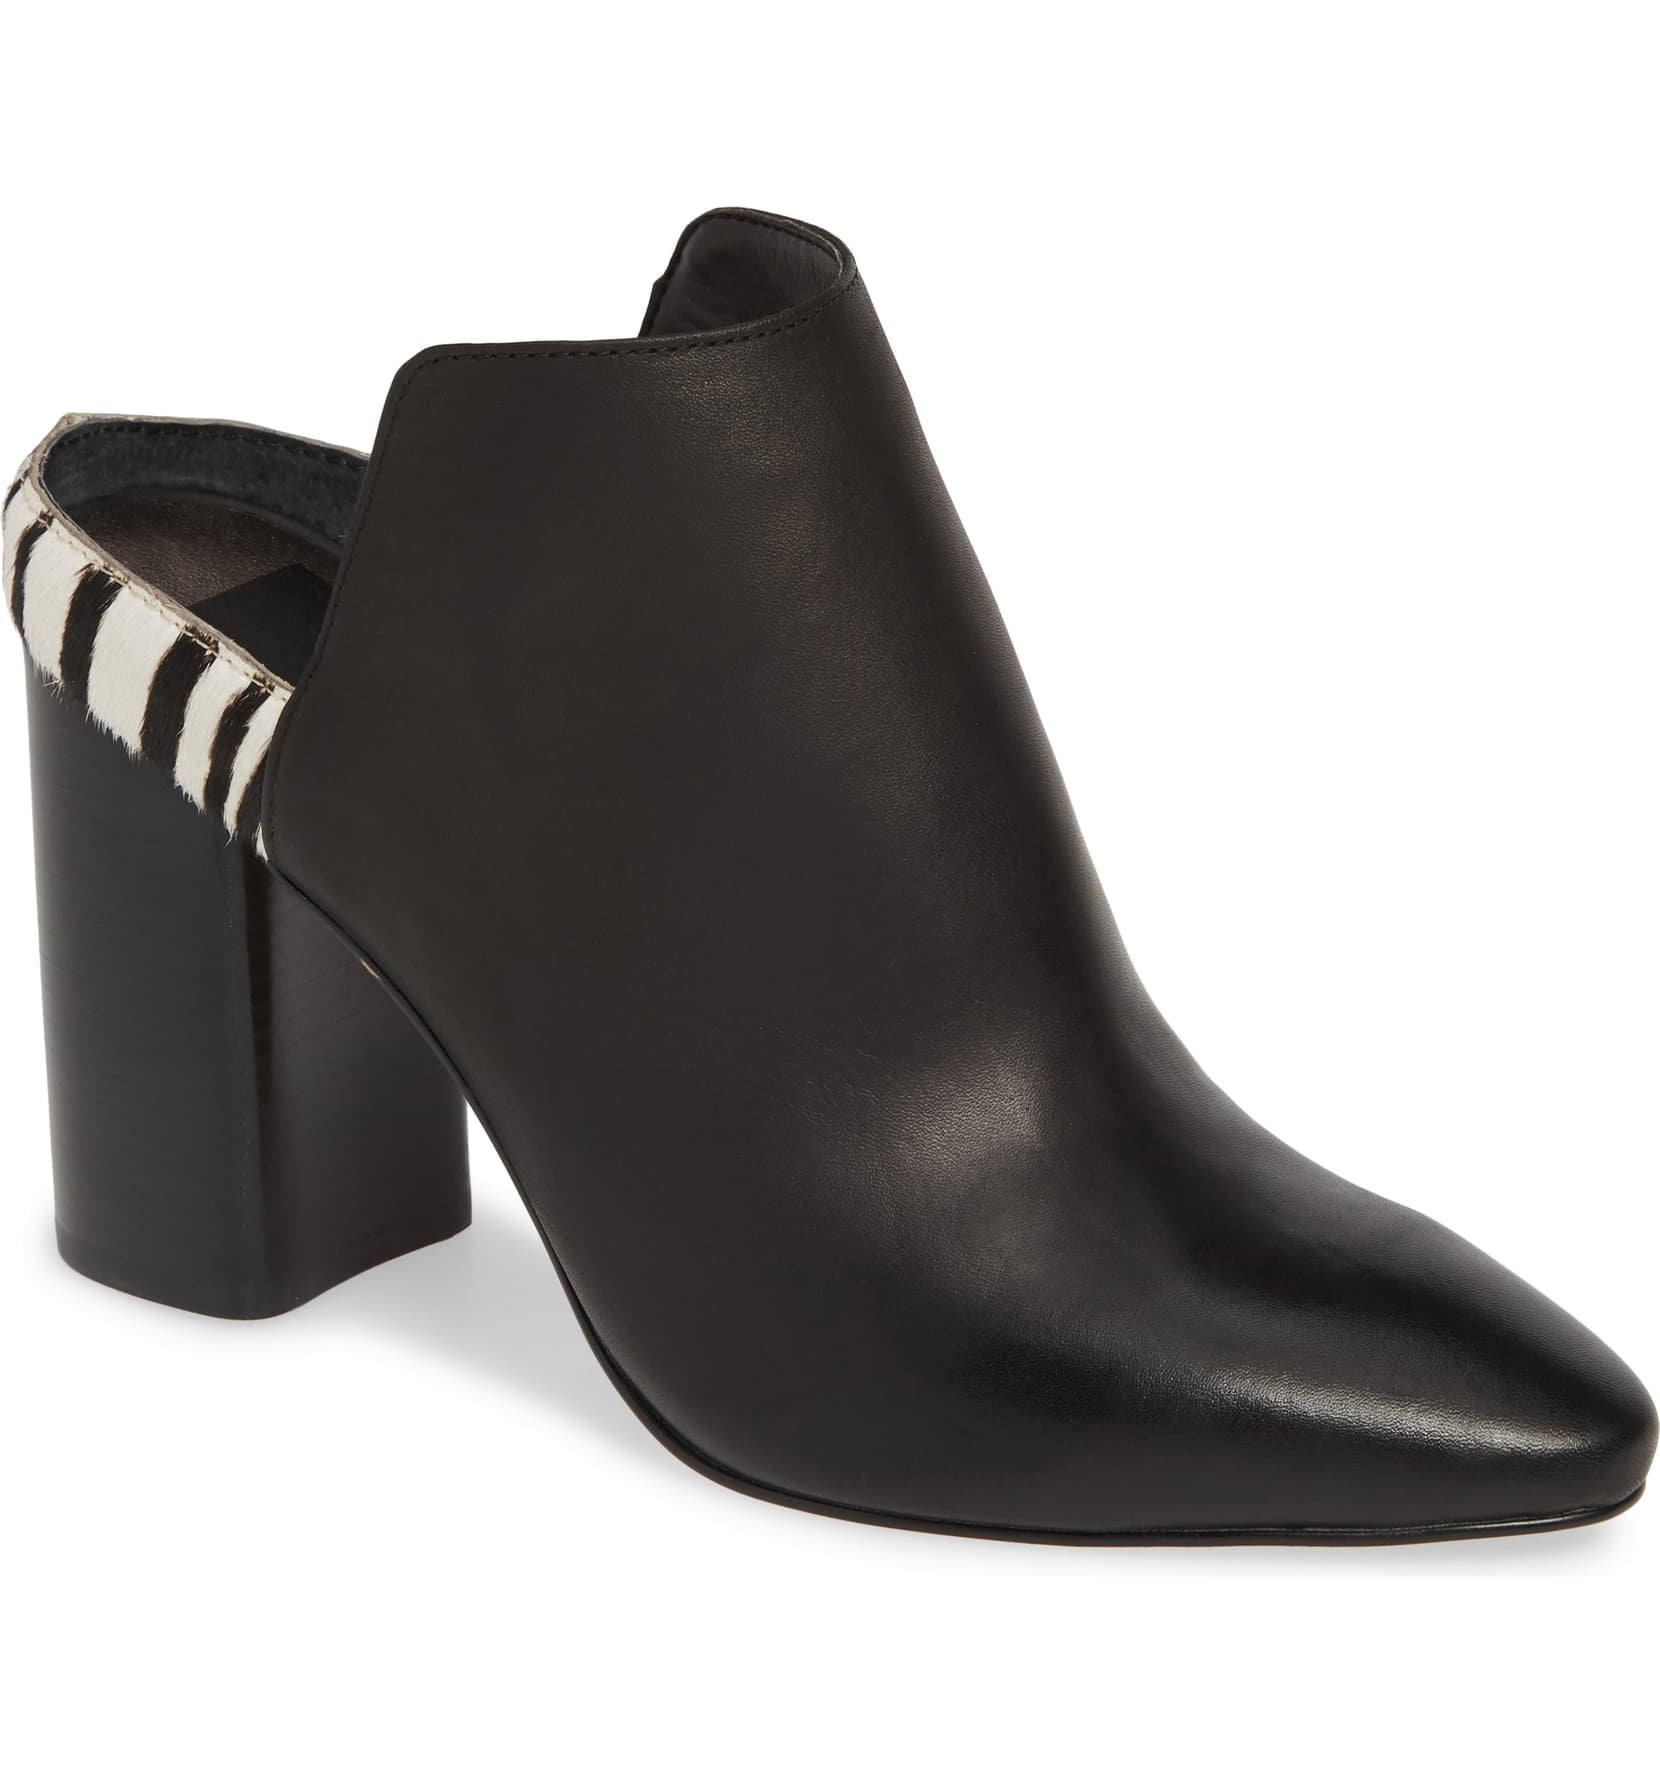 Dolce Vita Renly Mules | 24 